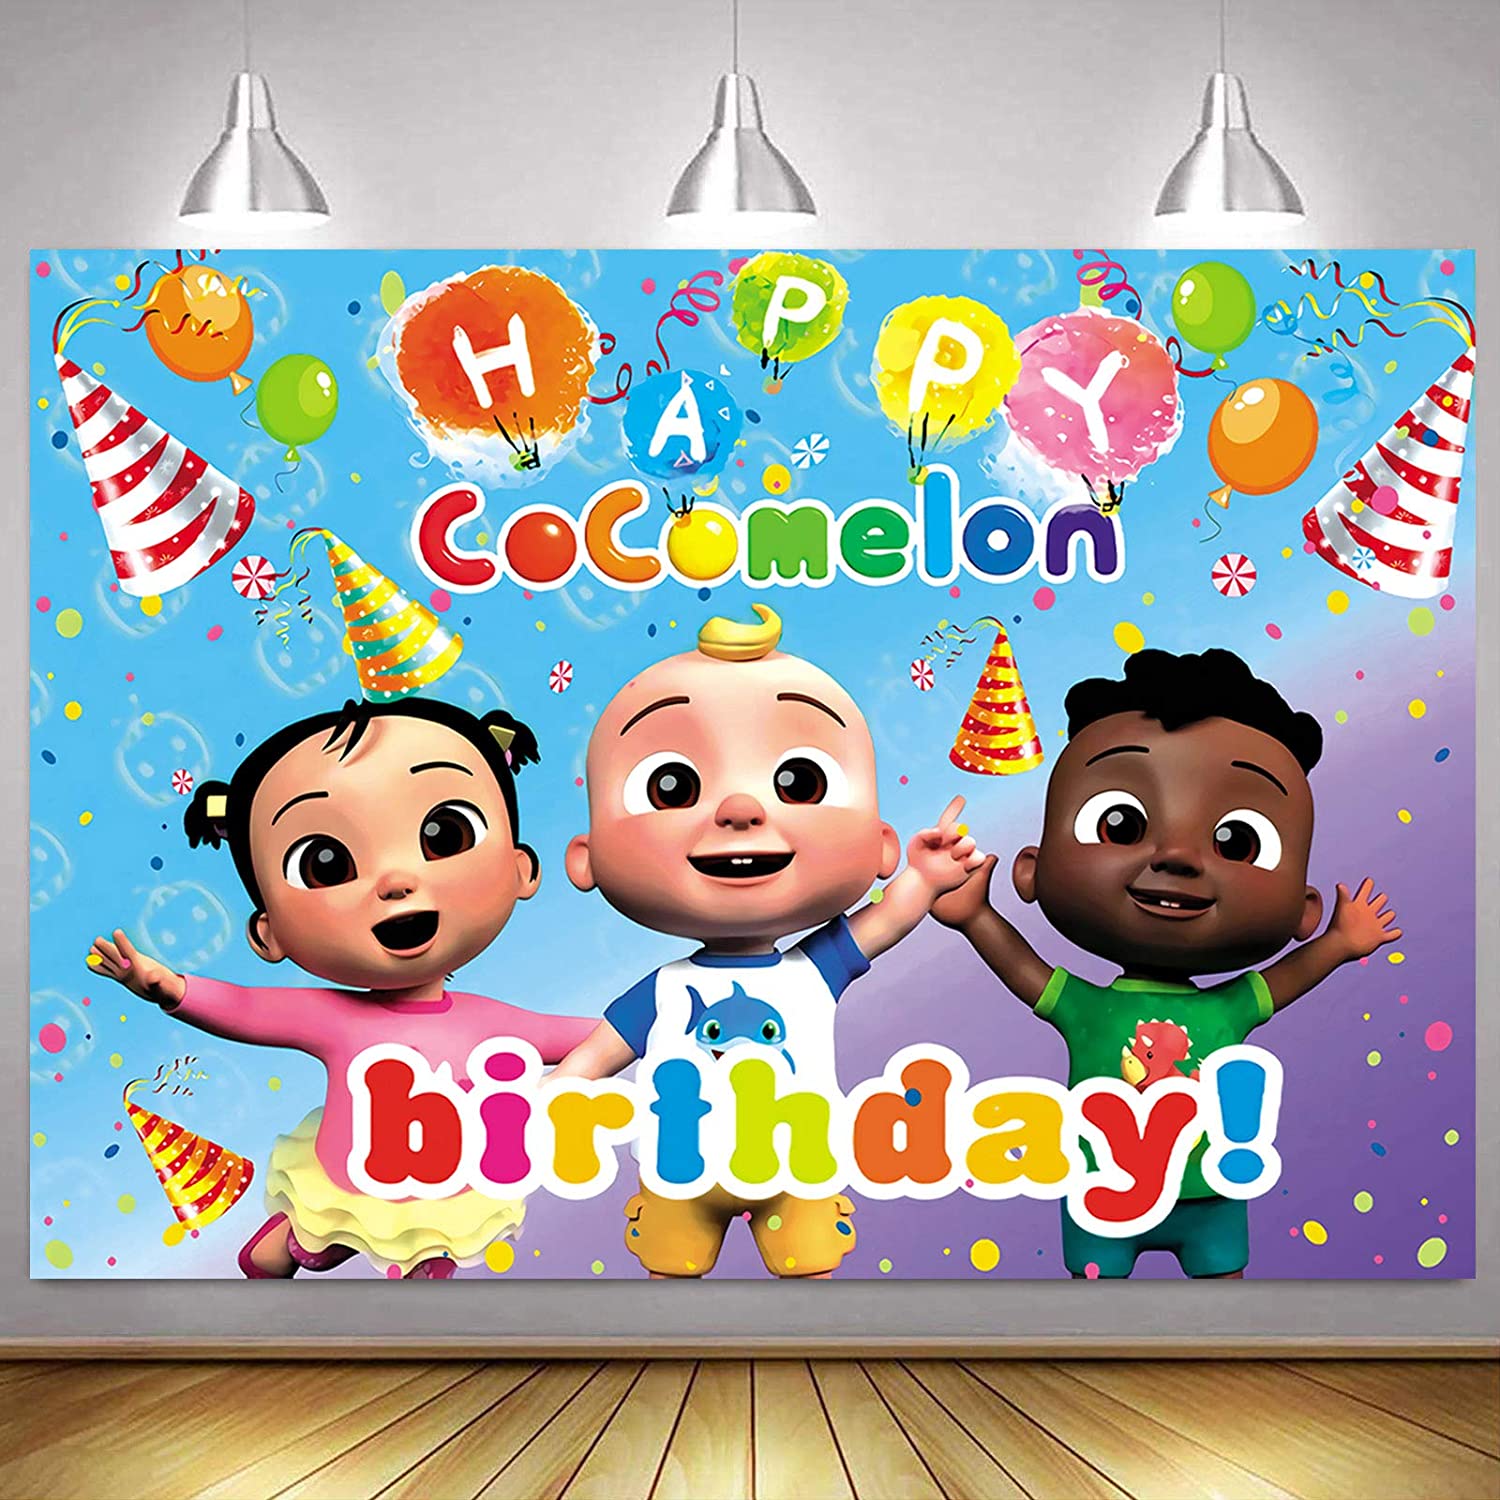 Lighting & Studio Cocomelon Backdrop for Kids Birthday Party Cartoon Cocomelon Family Theme Birthday Party Supplies for Girl cocomelon party decorations Backdrop Colorful Balloons Video Shooting Background Studio Props Video Studio